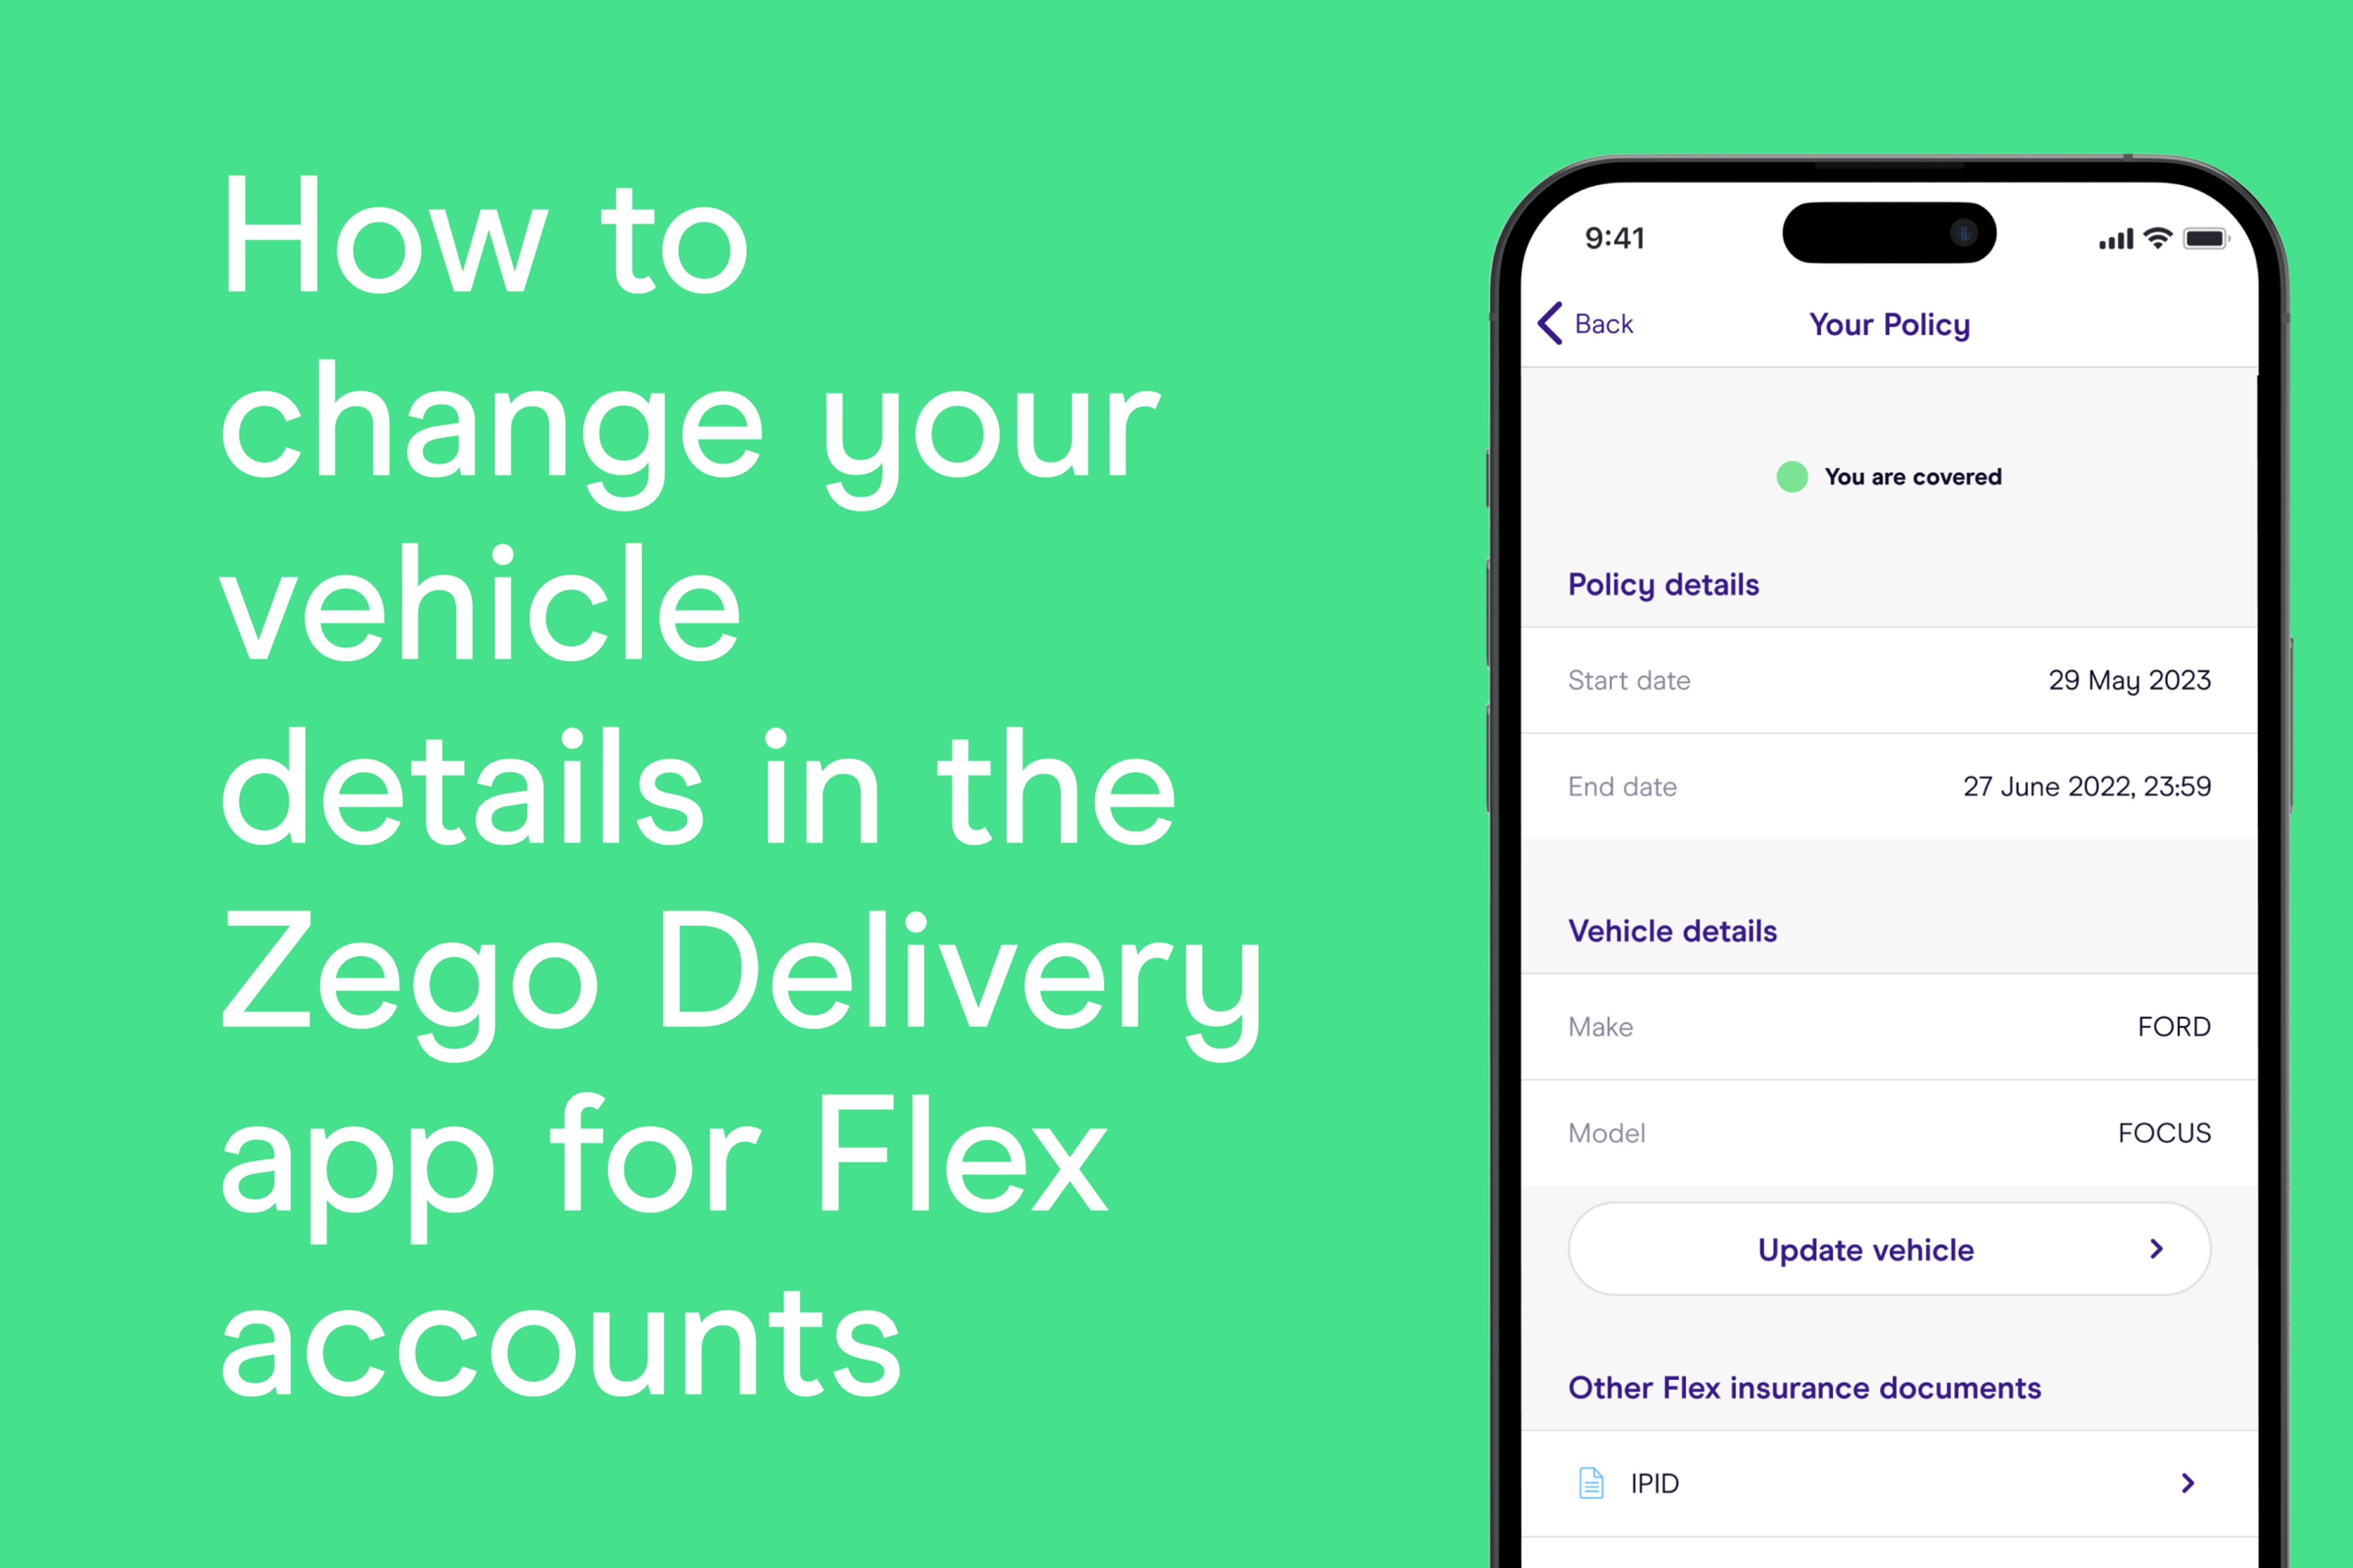 How to change your car in the Zego delivery app featured blog post image